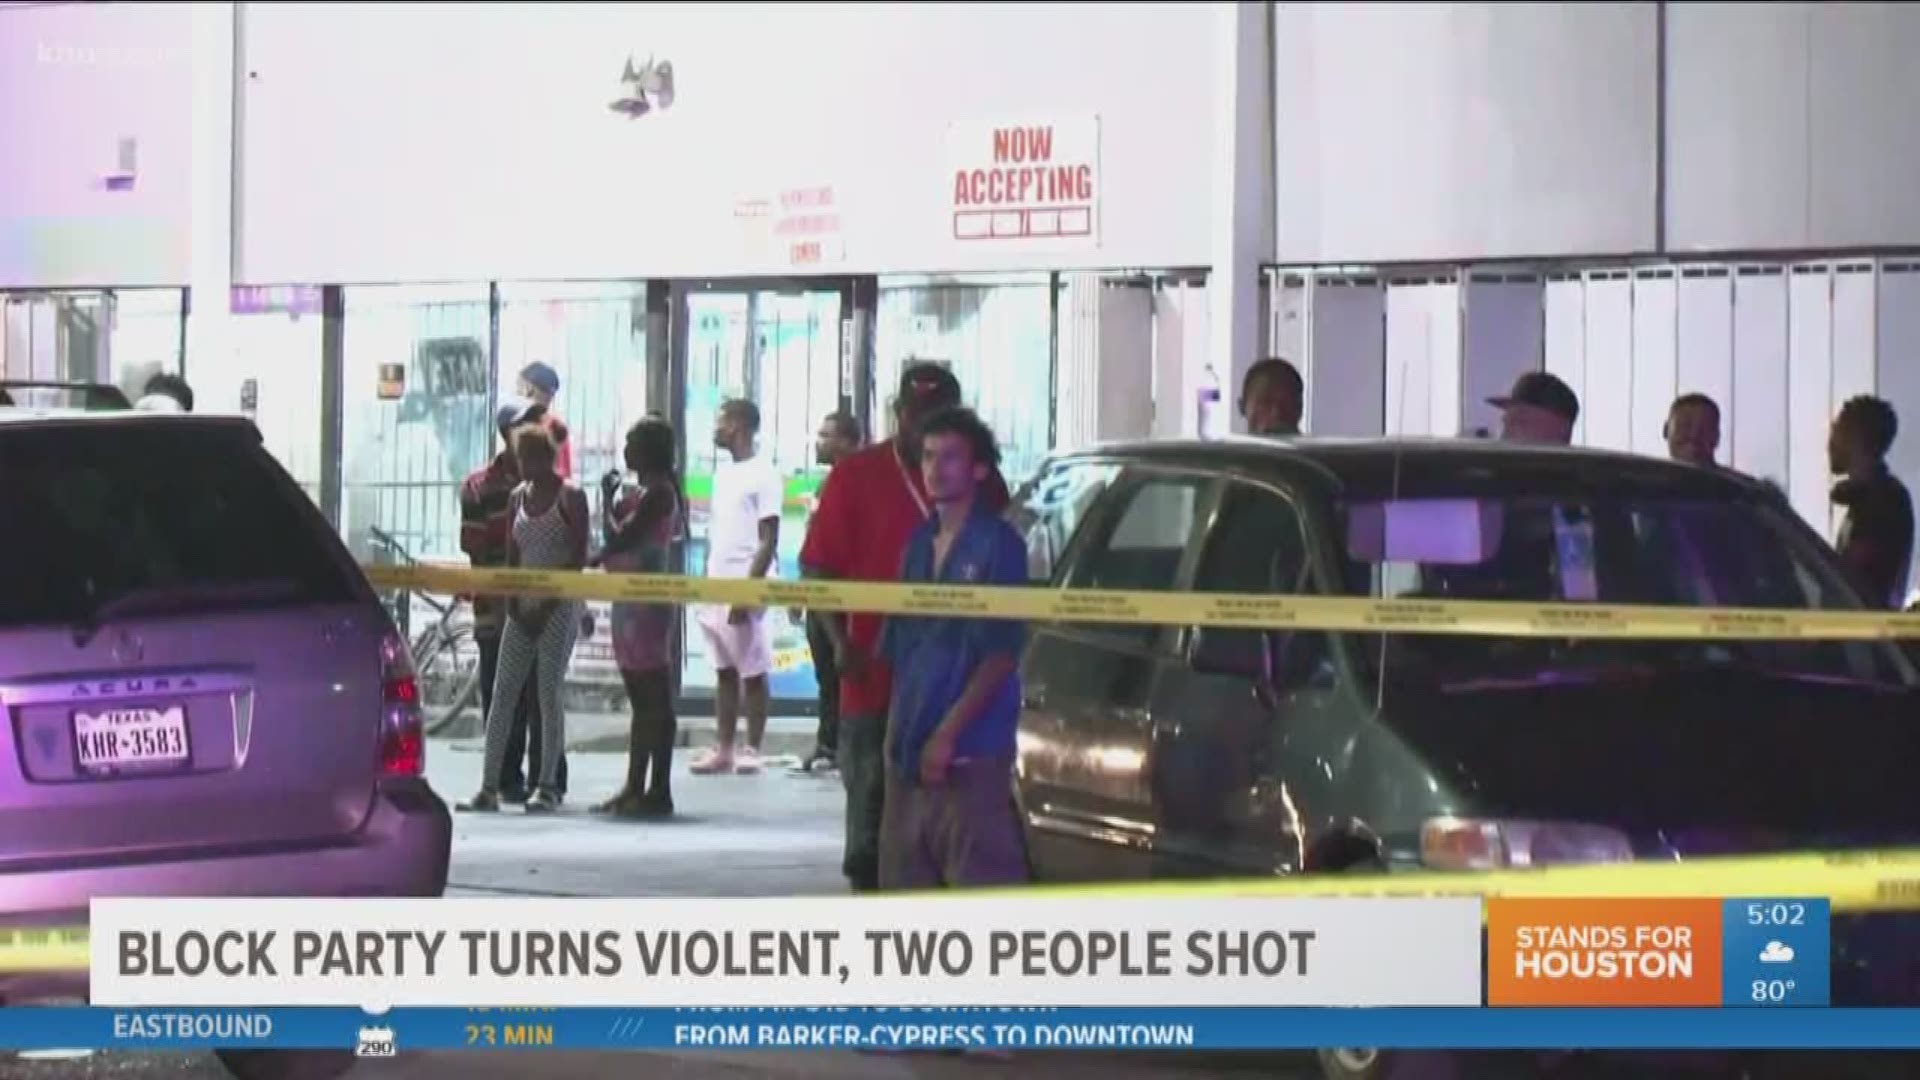 A block party turned violent when two people were shot overnight in northeast Houston.